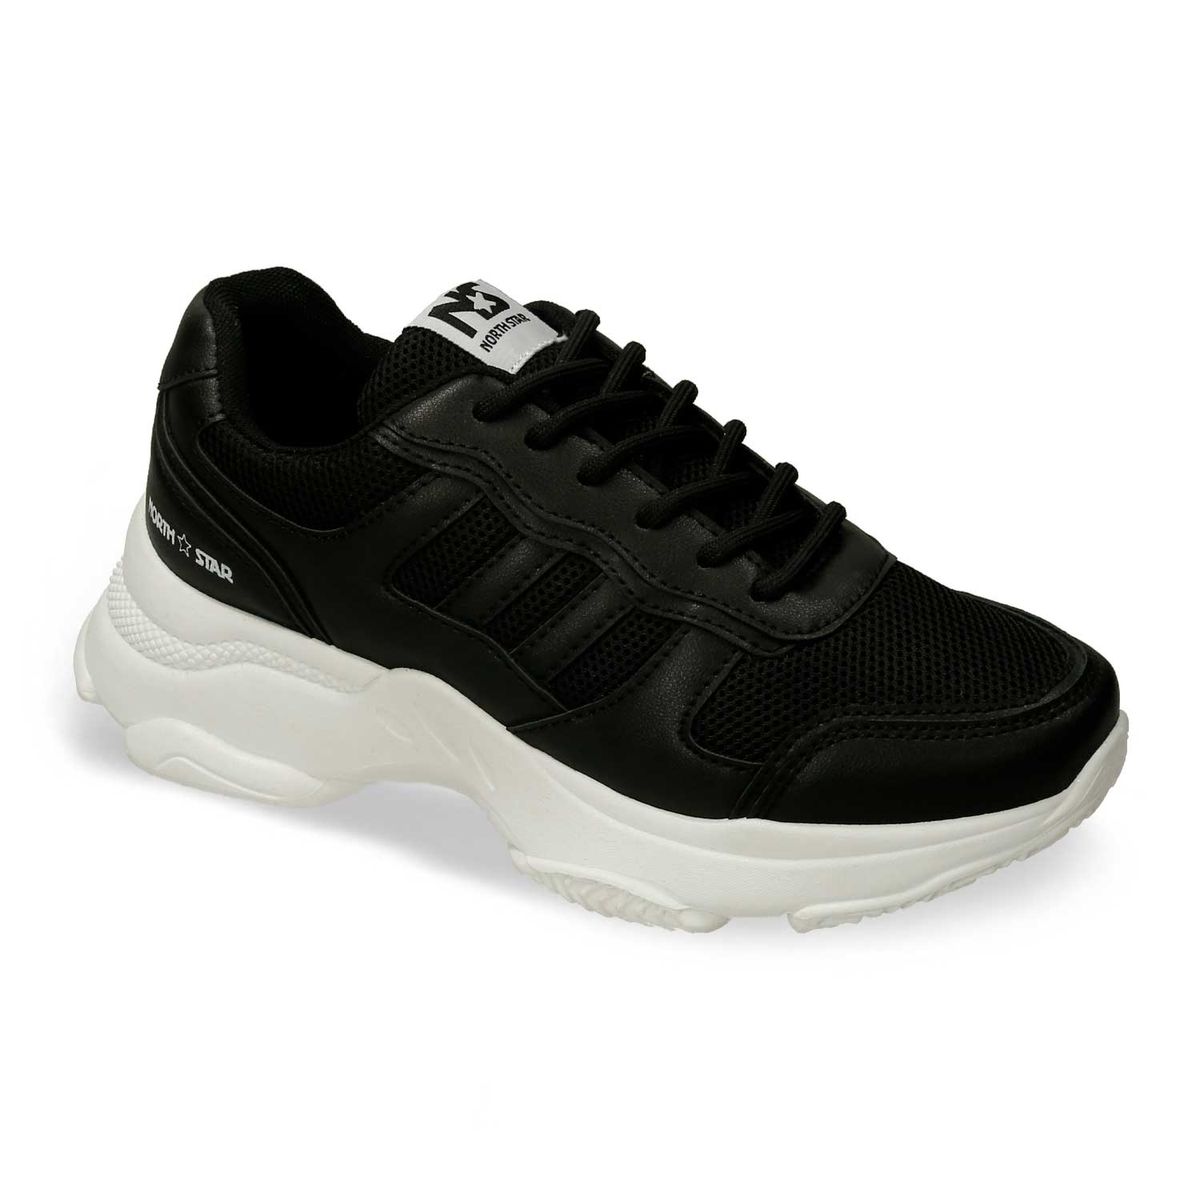 Tenis Casuales Negro North Star Gabarti Aoon Mujer